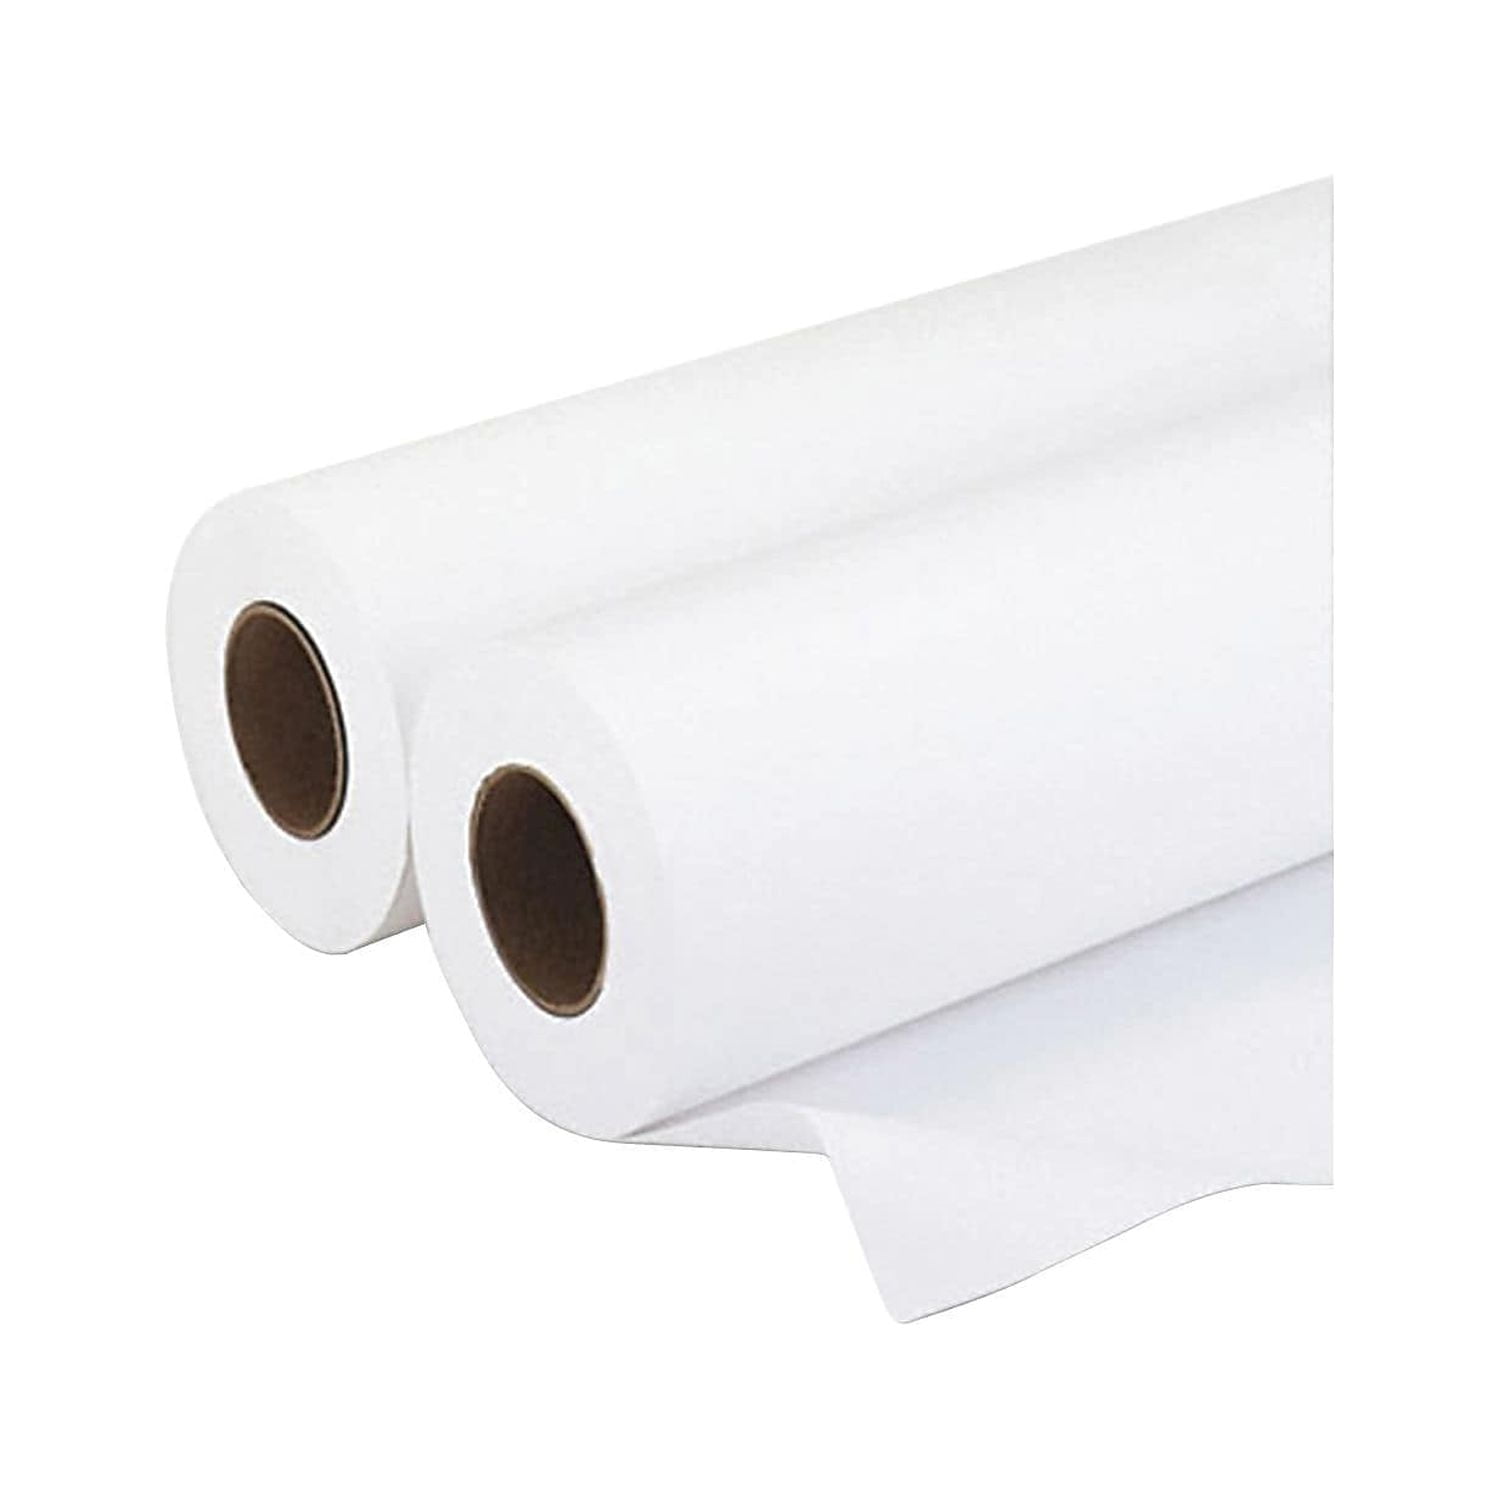 Freezer Paper Roll 18” x 1000' Alliance 40 lb. Bleached White with  Polyethylene Coating 1 Roll 